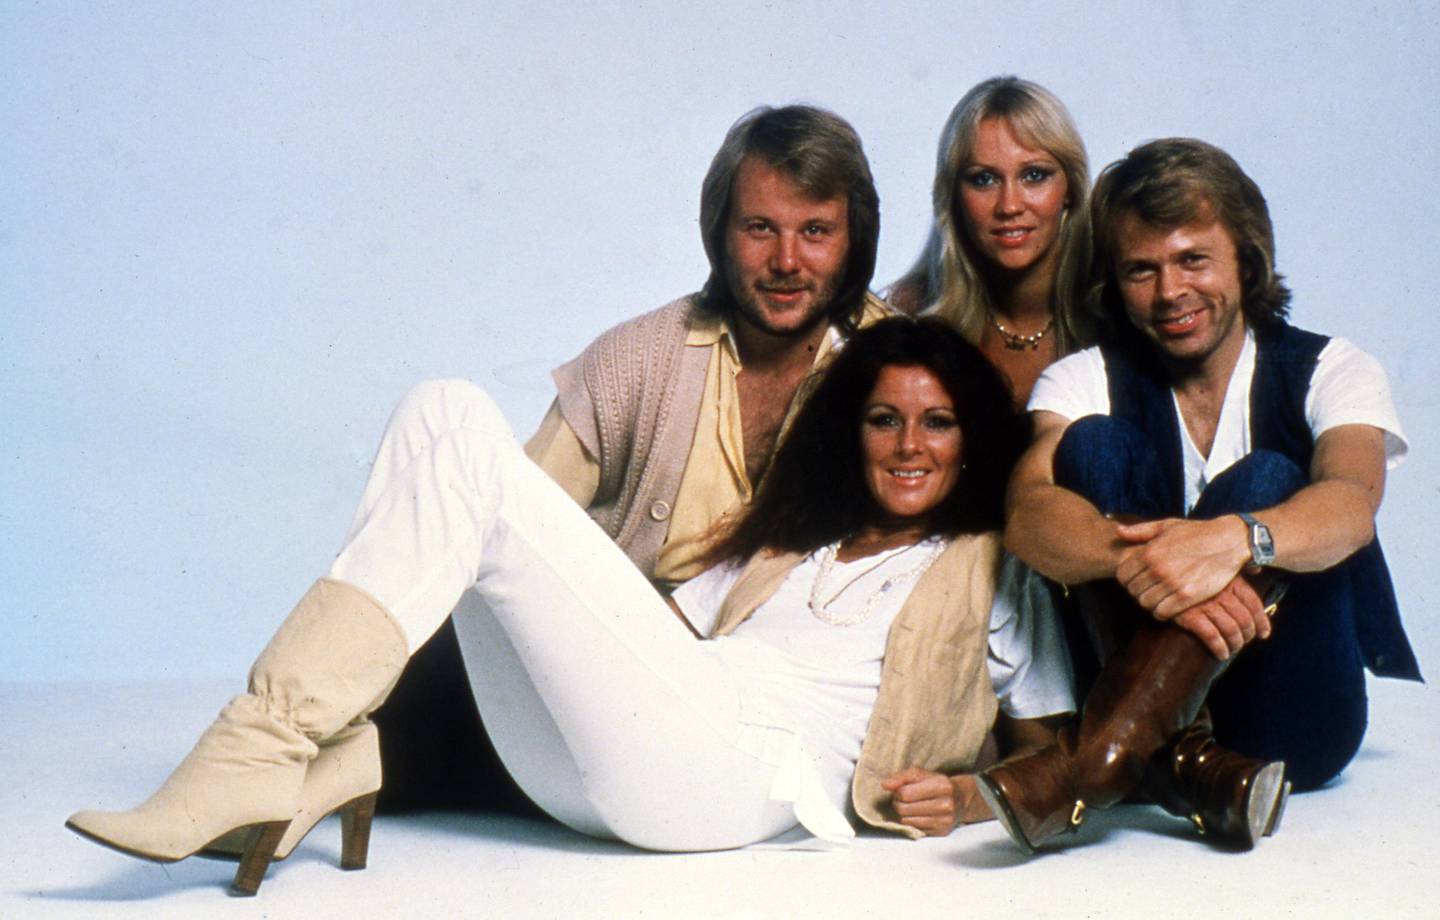 FILE - This 1977 file photo shows members of Swedish pop group Abba, left to right: Bjorn Ulvaeus, Agnetha (known as Anna) Faltskog, Annifrid (known as Frida) Lyngstad and Benny Anderson. (AP Photo, file)
Photo:Torbjörn Calvero/POLAR